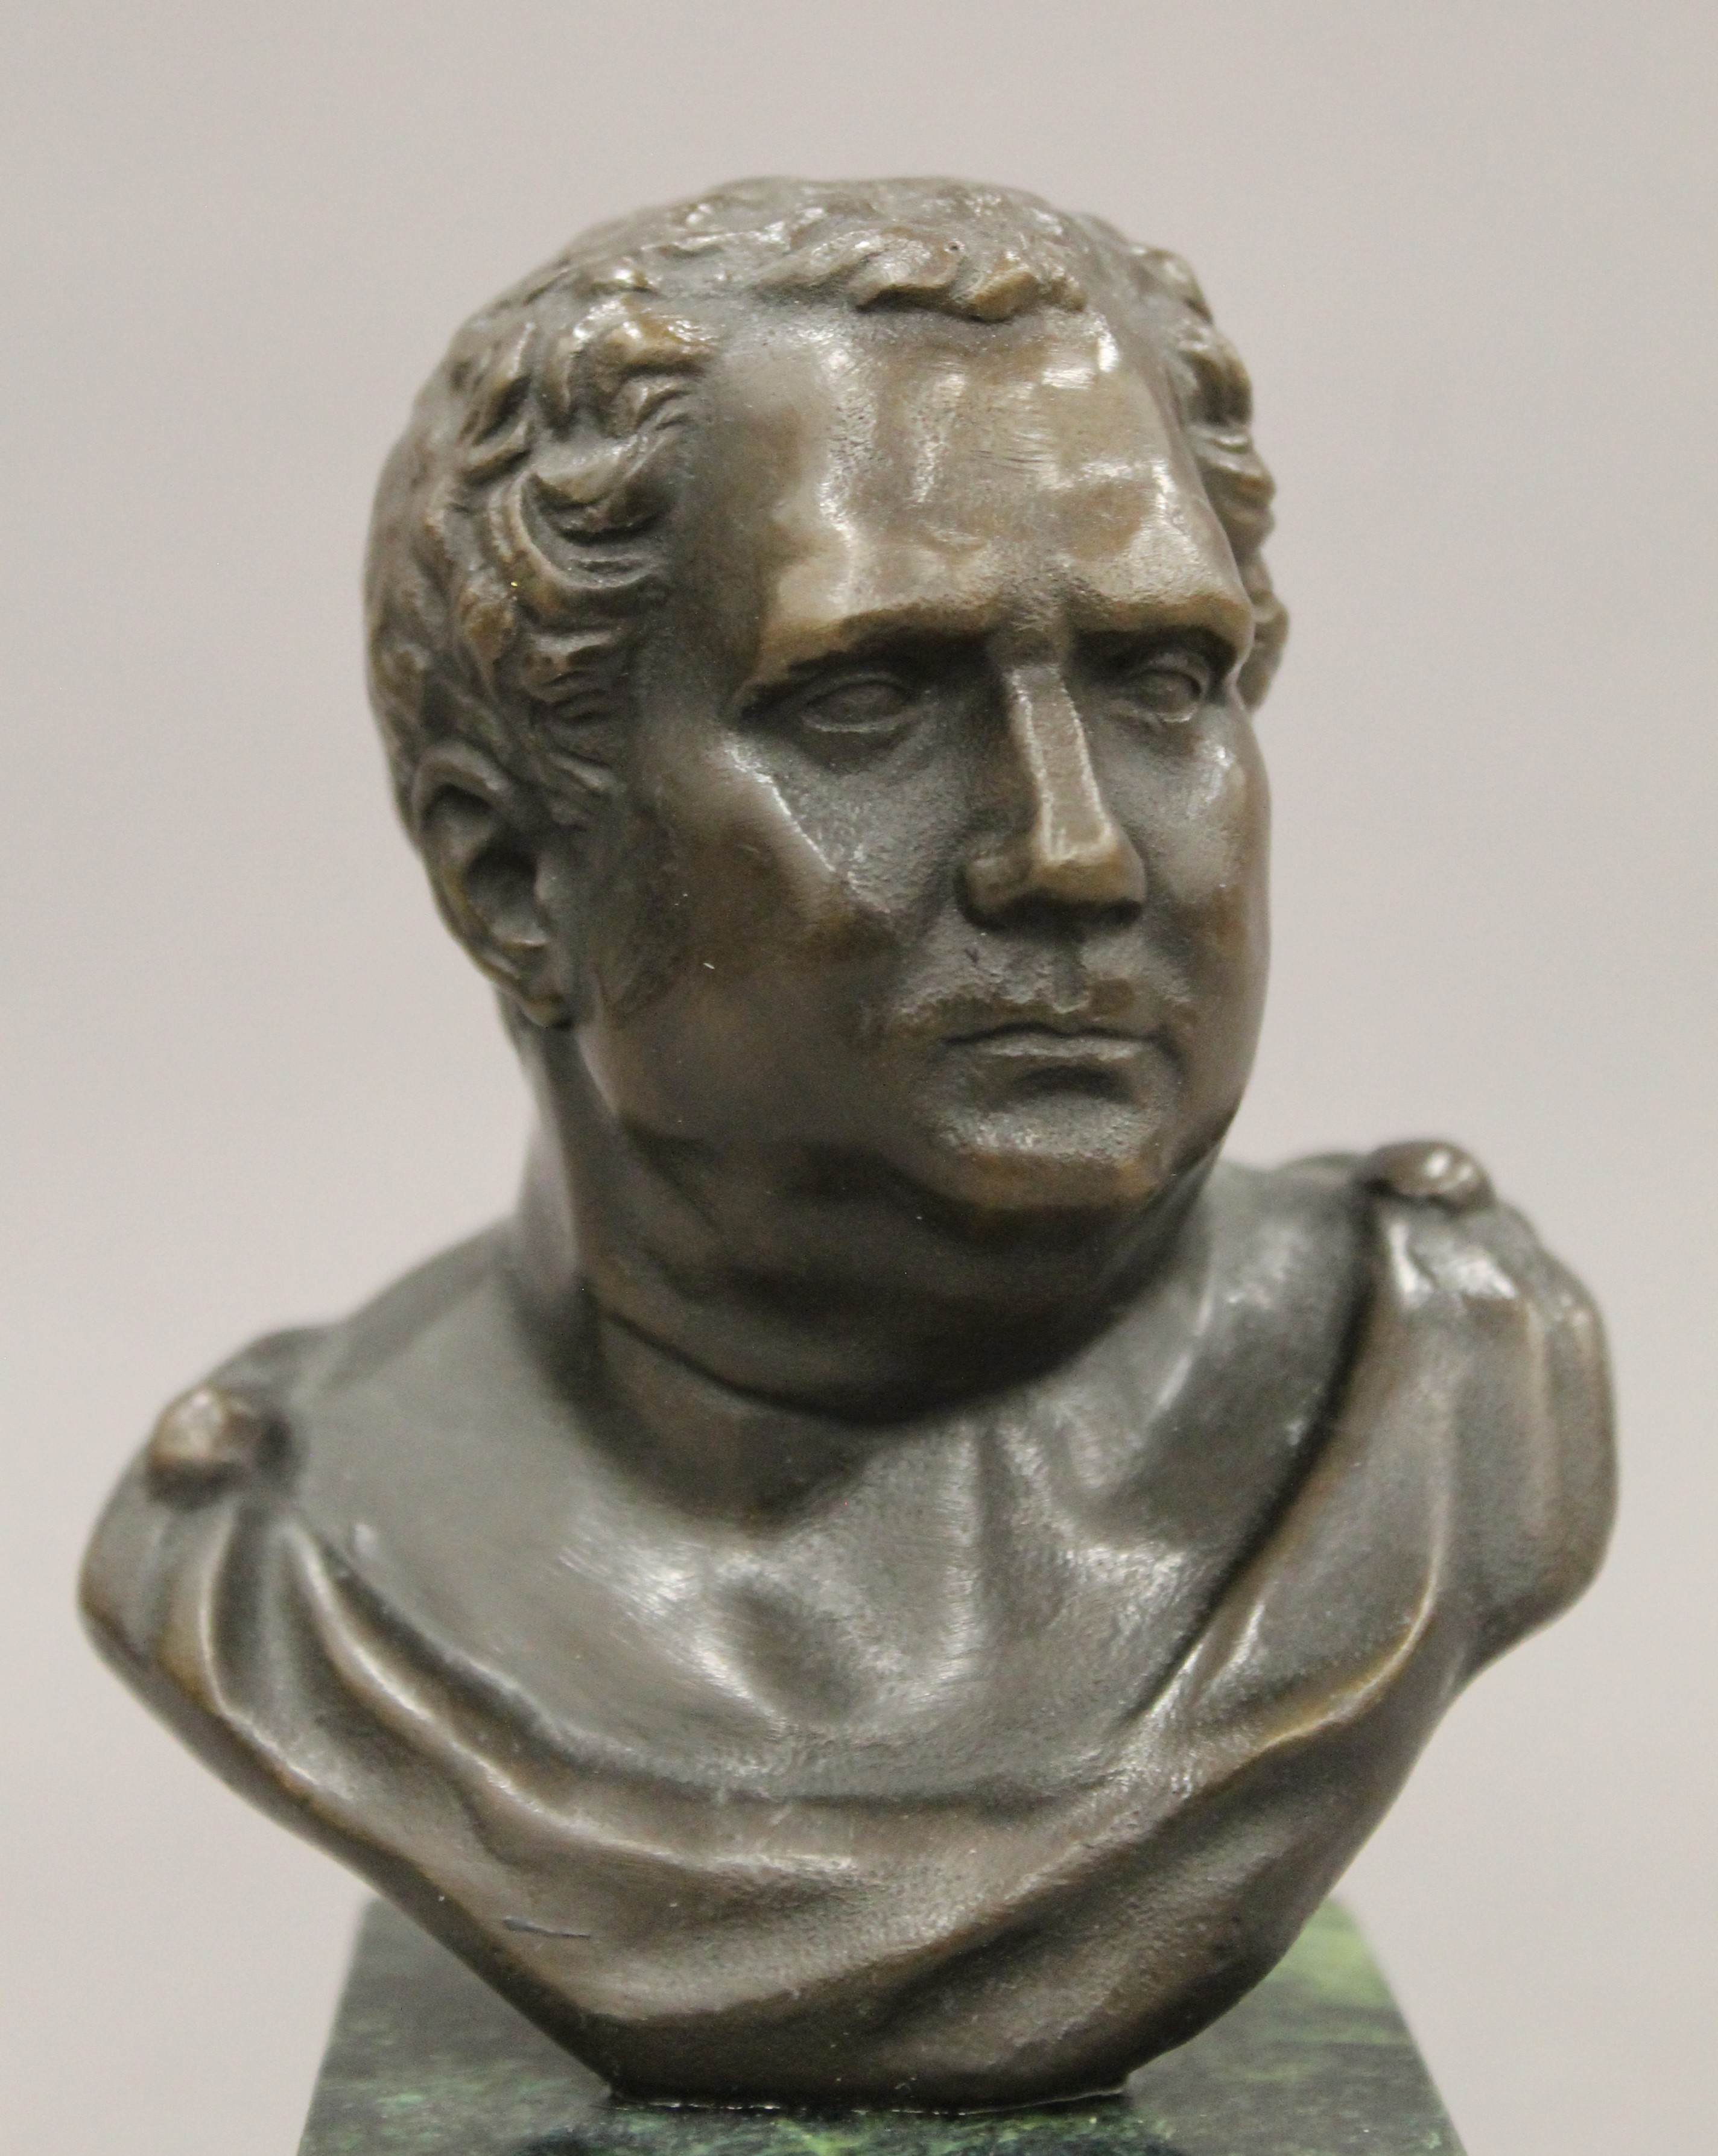 A small bronze bust of a classical figure. 14 cm high. - Image 2 of 4